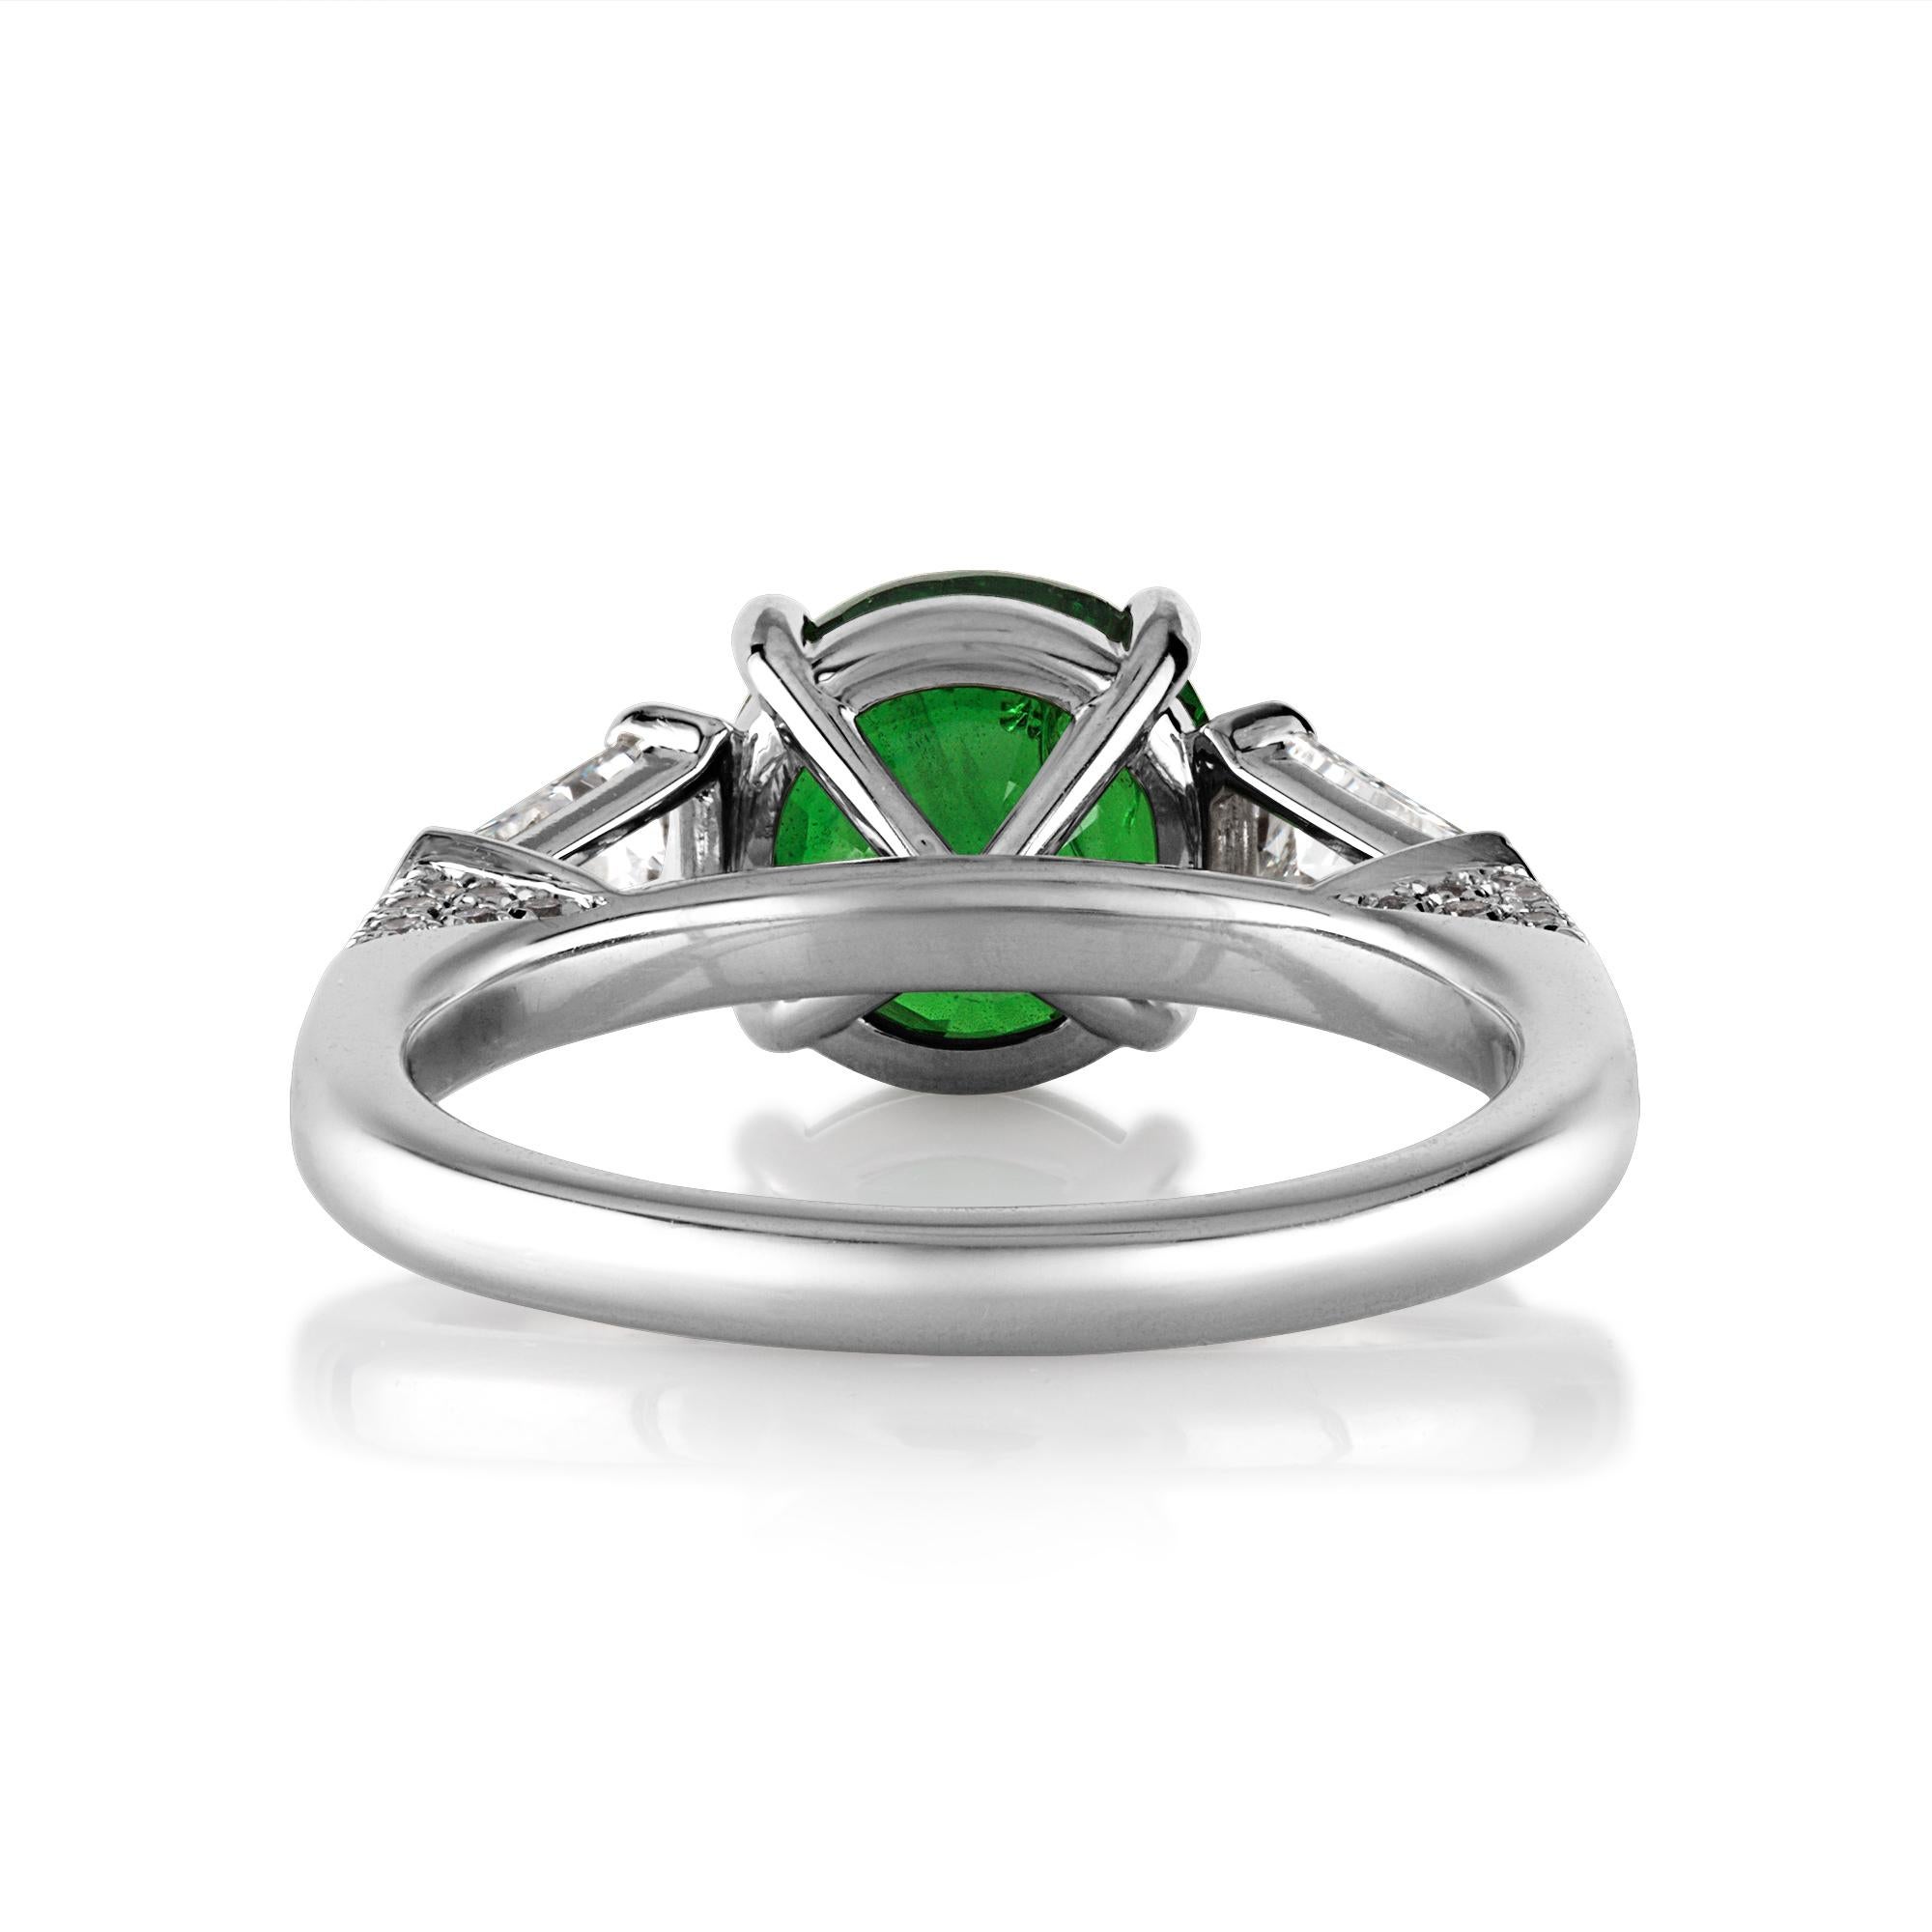 GIA 4.52ct Green Tsavorite Diamond Three Stone Engagement Wedding Platinum Ring In Good Condition For Sale In New York, NY